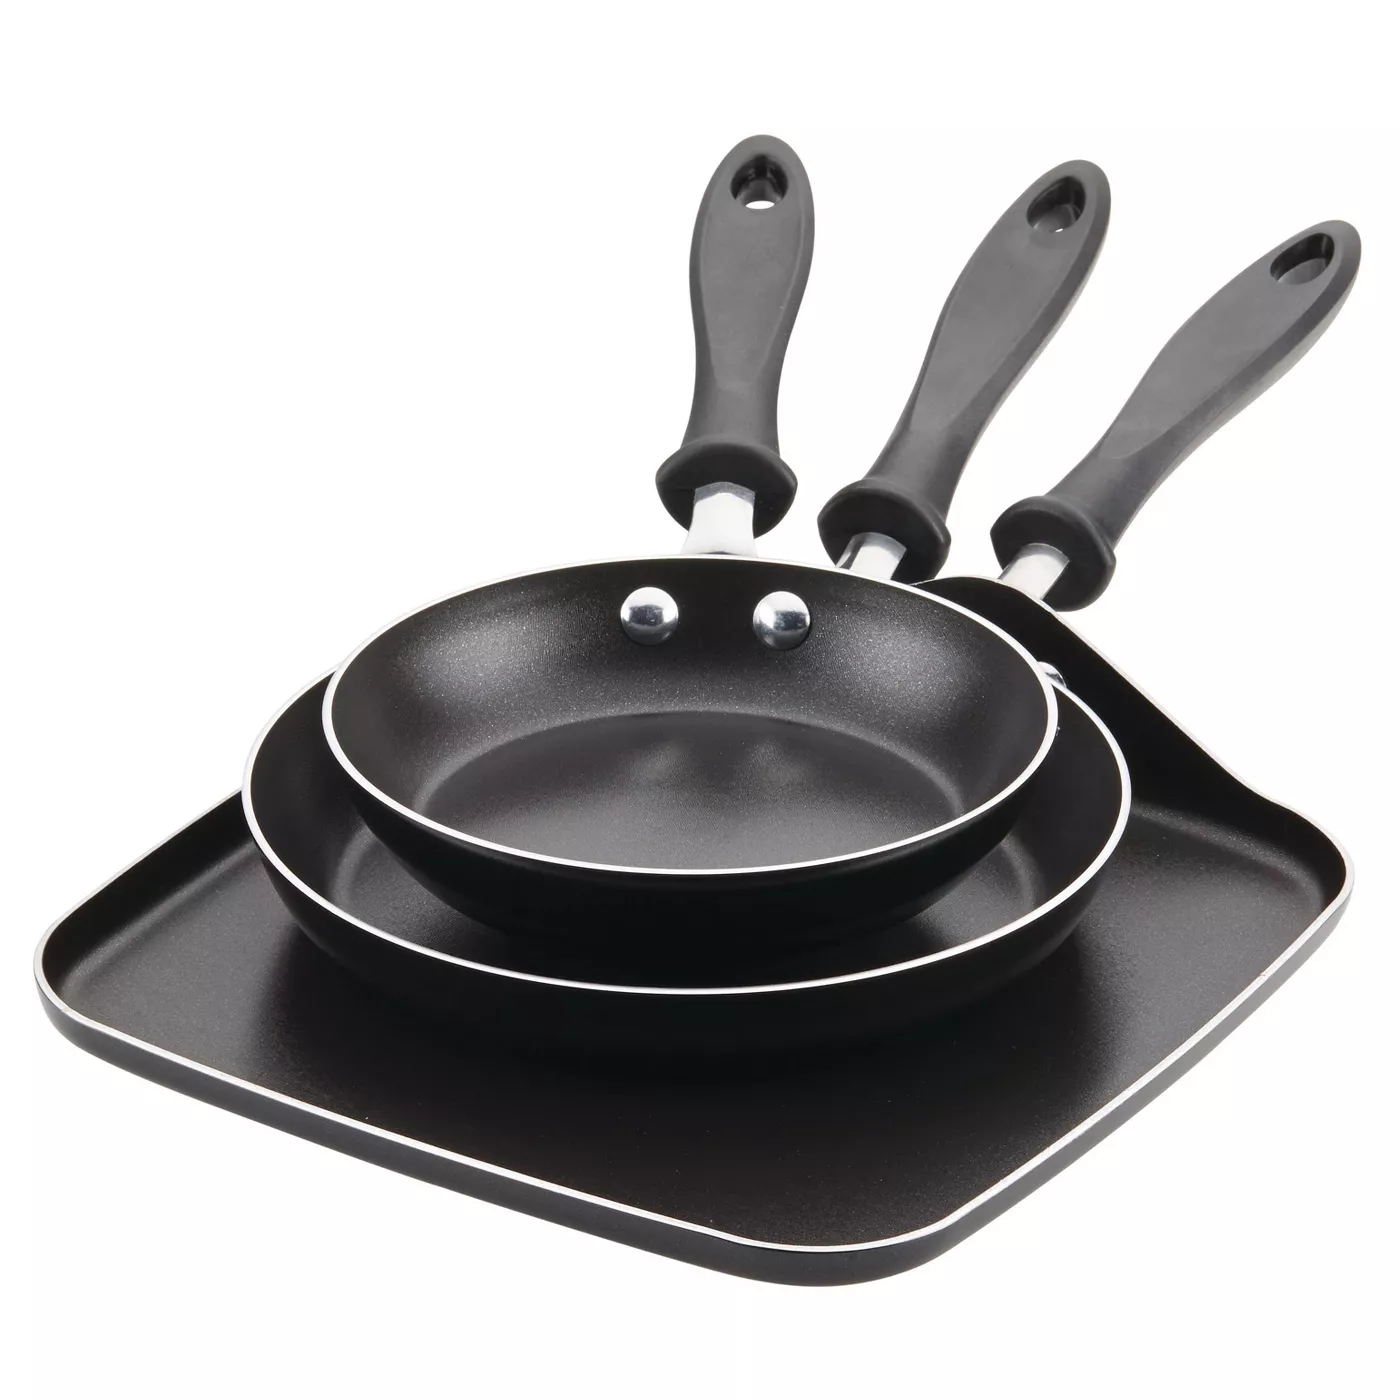 Farberware 3pc Nonstick Aluminum Reliance Skillet and Griddle Cookware Set Black - image 1 of 7